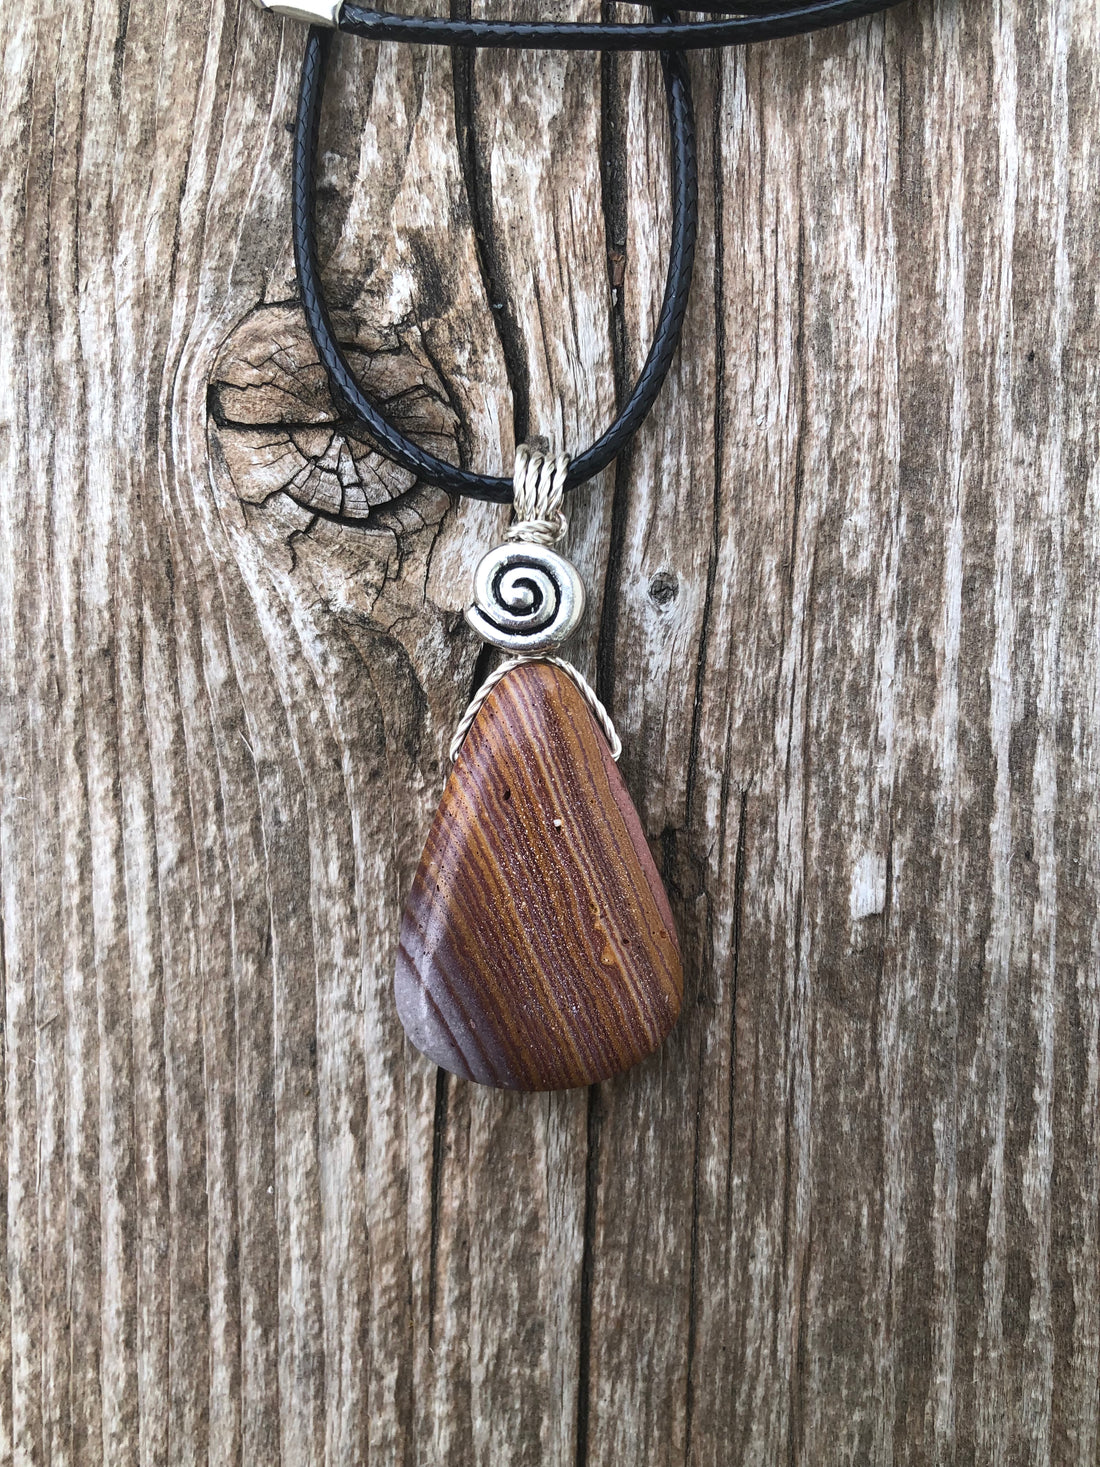 Rhyolite for Igniting Potential, Strength and Creativity. Swirl to Signify Consciousness.